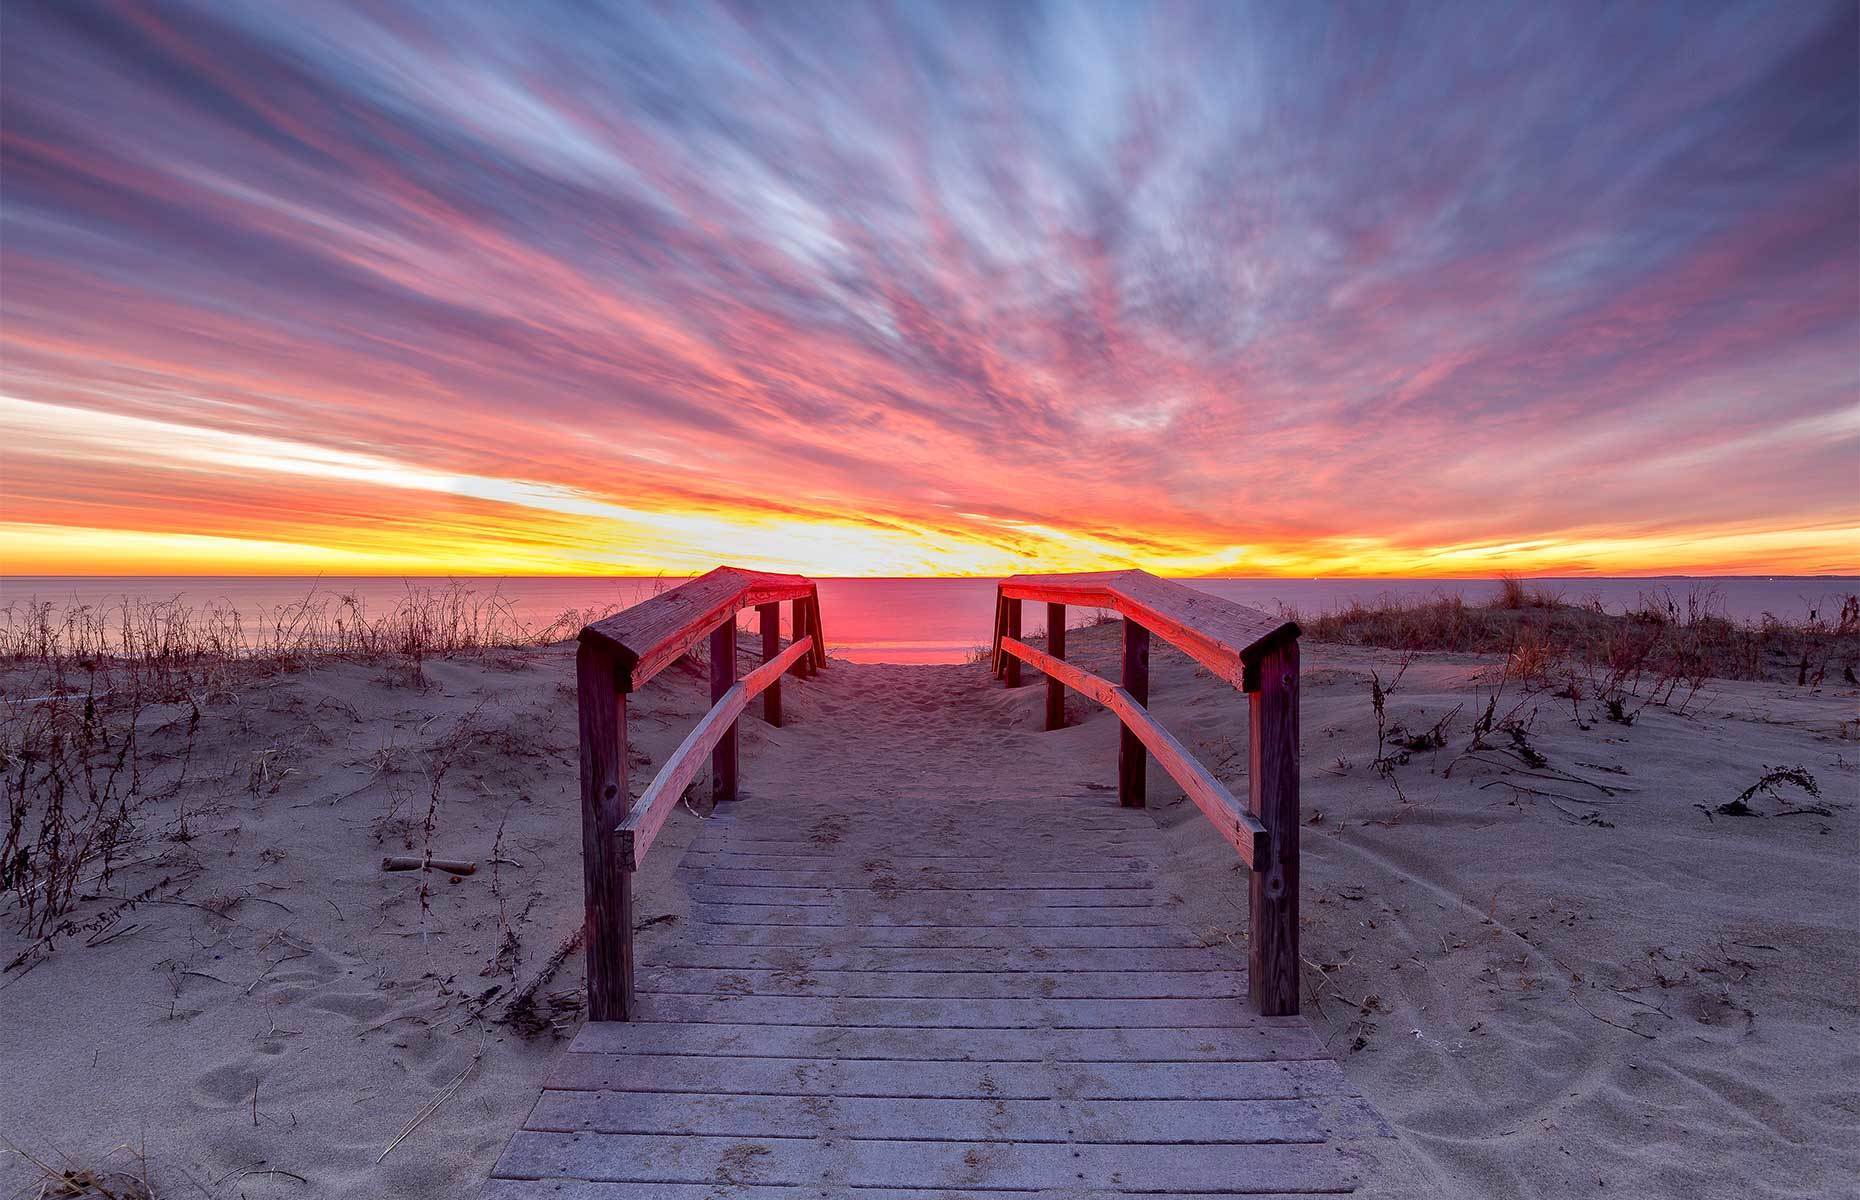 <p class="p1"><span>Catching a sunset in person on Plum Island is nothing short of amazing. Sunrises are just as spectacular. Take advantage of your visit to this island near Newburyport to relax on its lovely beach.</span></p>